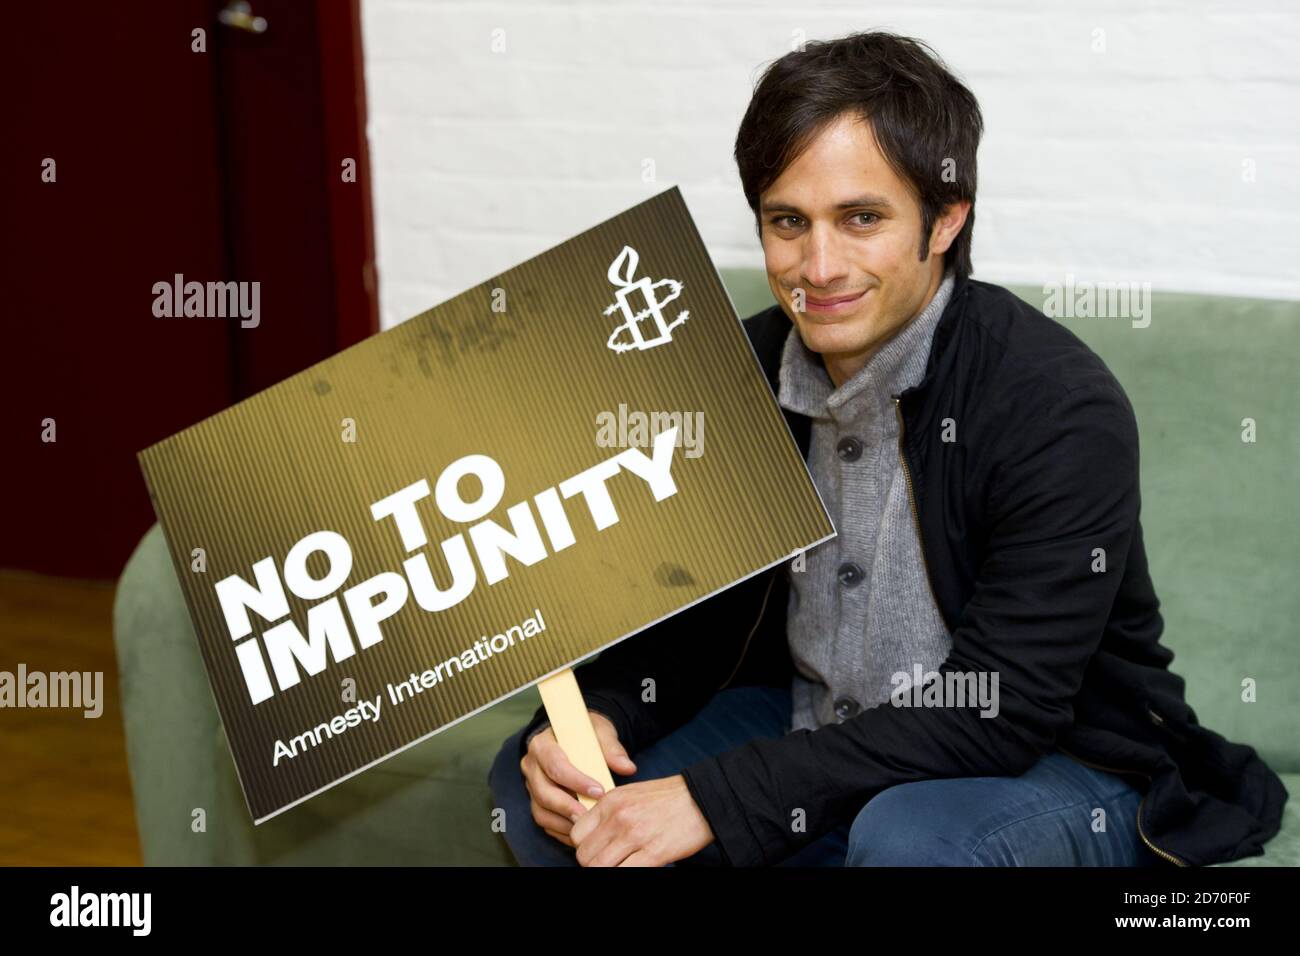 Gael Garcia Bernal pictured at Amnesty International's offices in east London, in support of their campaign to end human rights abuses around the world. Stock Photo